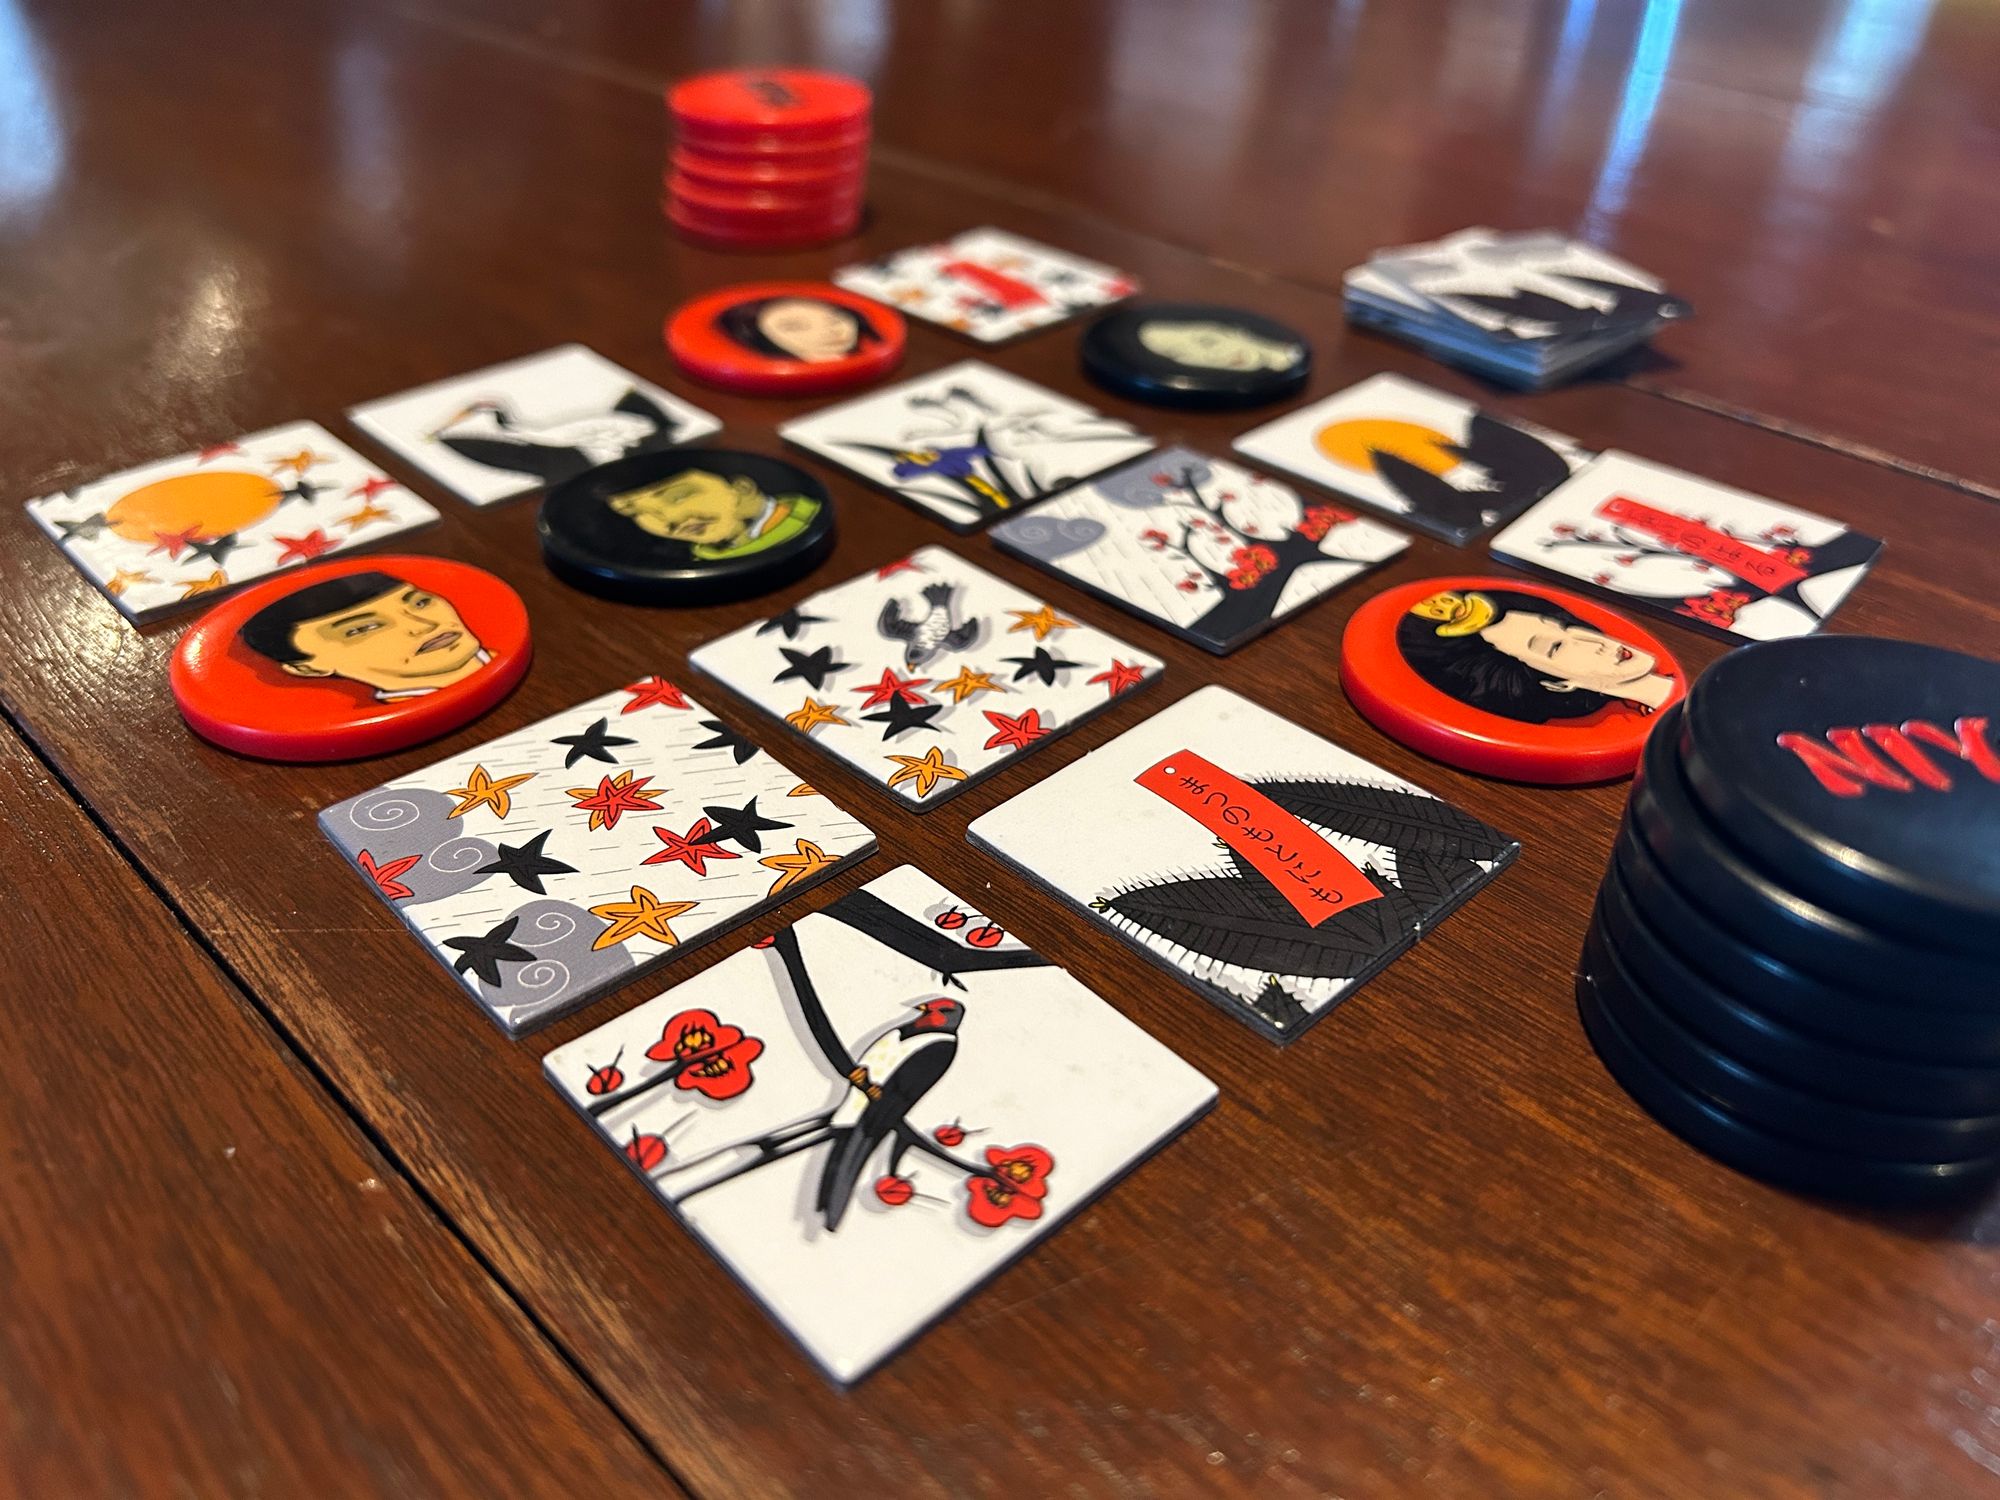 Tile grid with tiles and discs from the game Niya on a wooden table